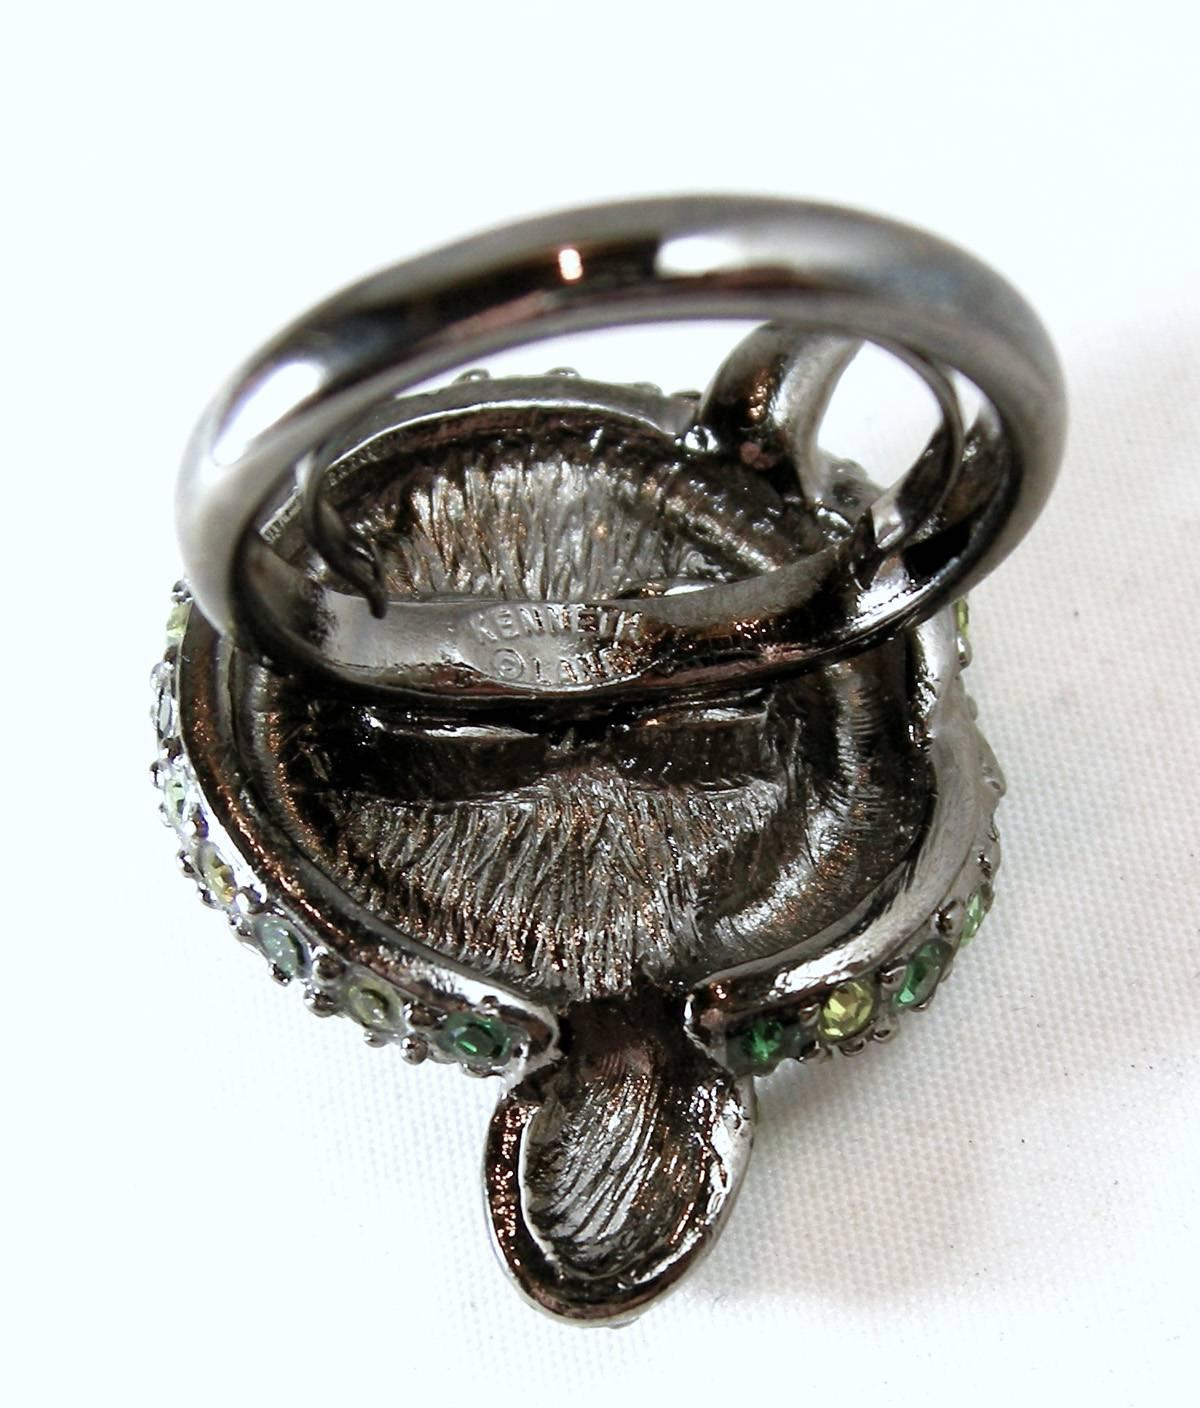 This fun turtle ring features a ribbed onyx simulated stone in the center acting as the turtle’s shell.  There are different shades of green rhinestones while the eyes are red rhinestones sitting in a clear rhinestone head. It is in a pewter tone